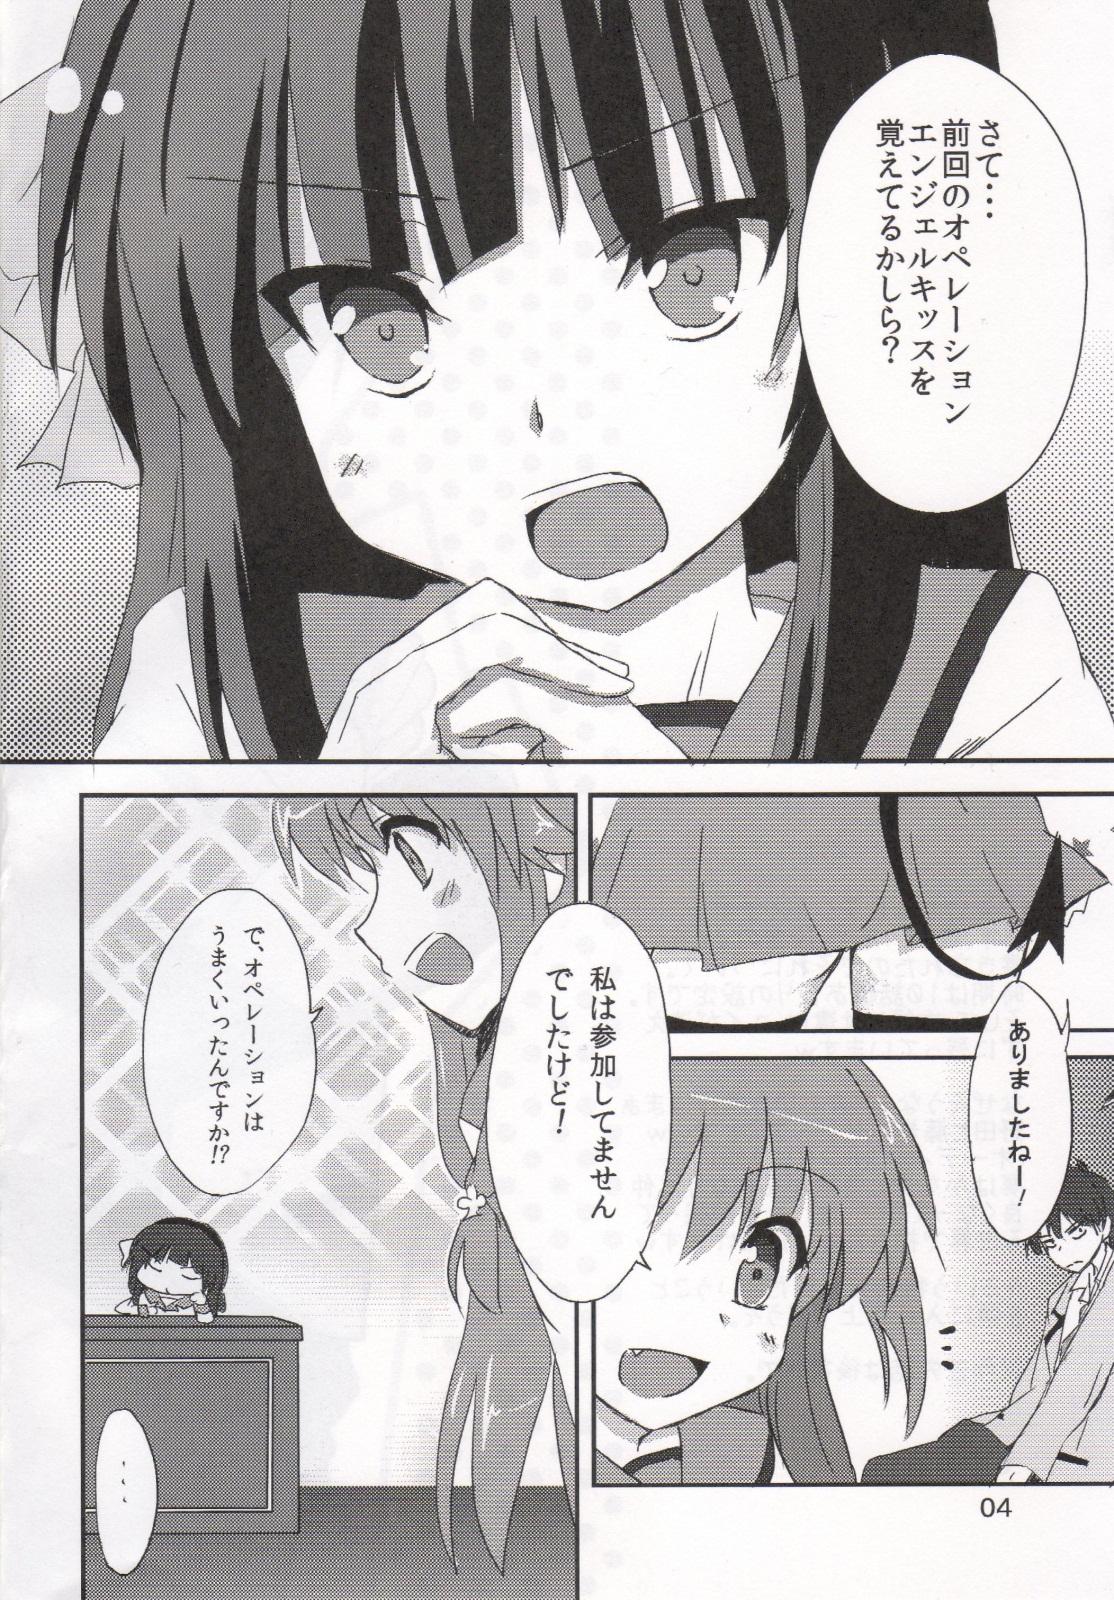 Gag My Heart is yours! ver.2♪ - Angel beats Striptease - Page 3